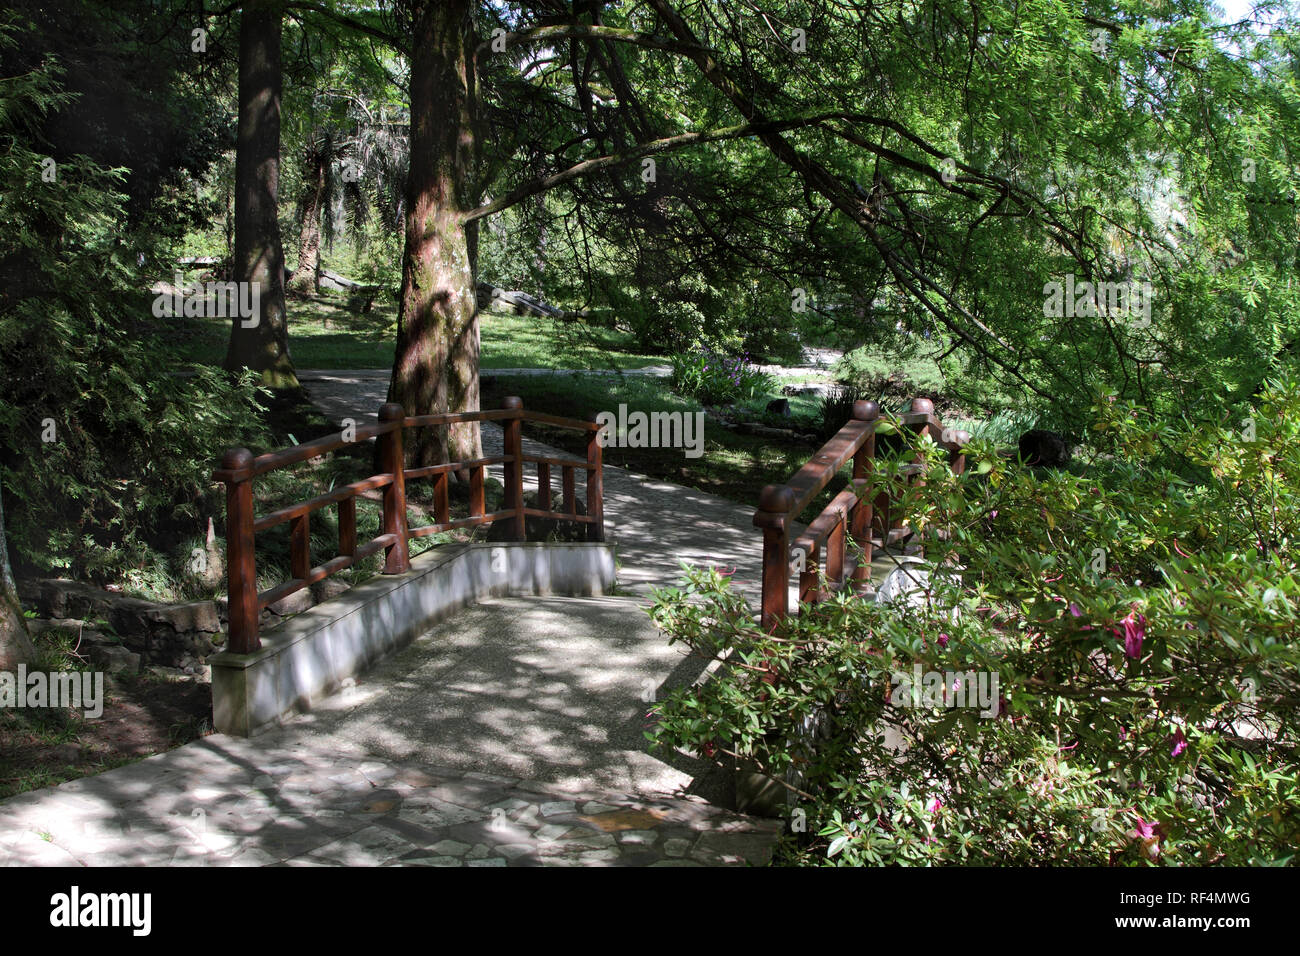 Beautiful stone staircase with wooden railing in the summer park. Stock Photo